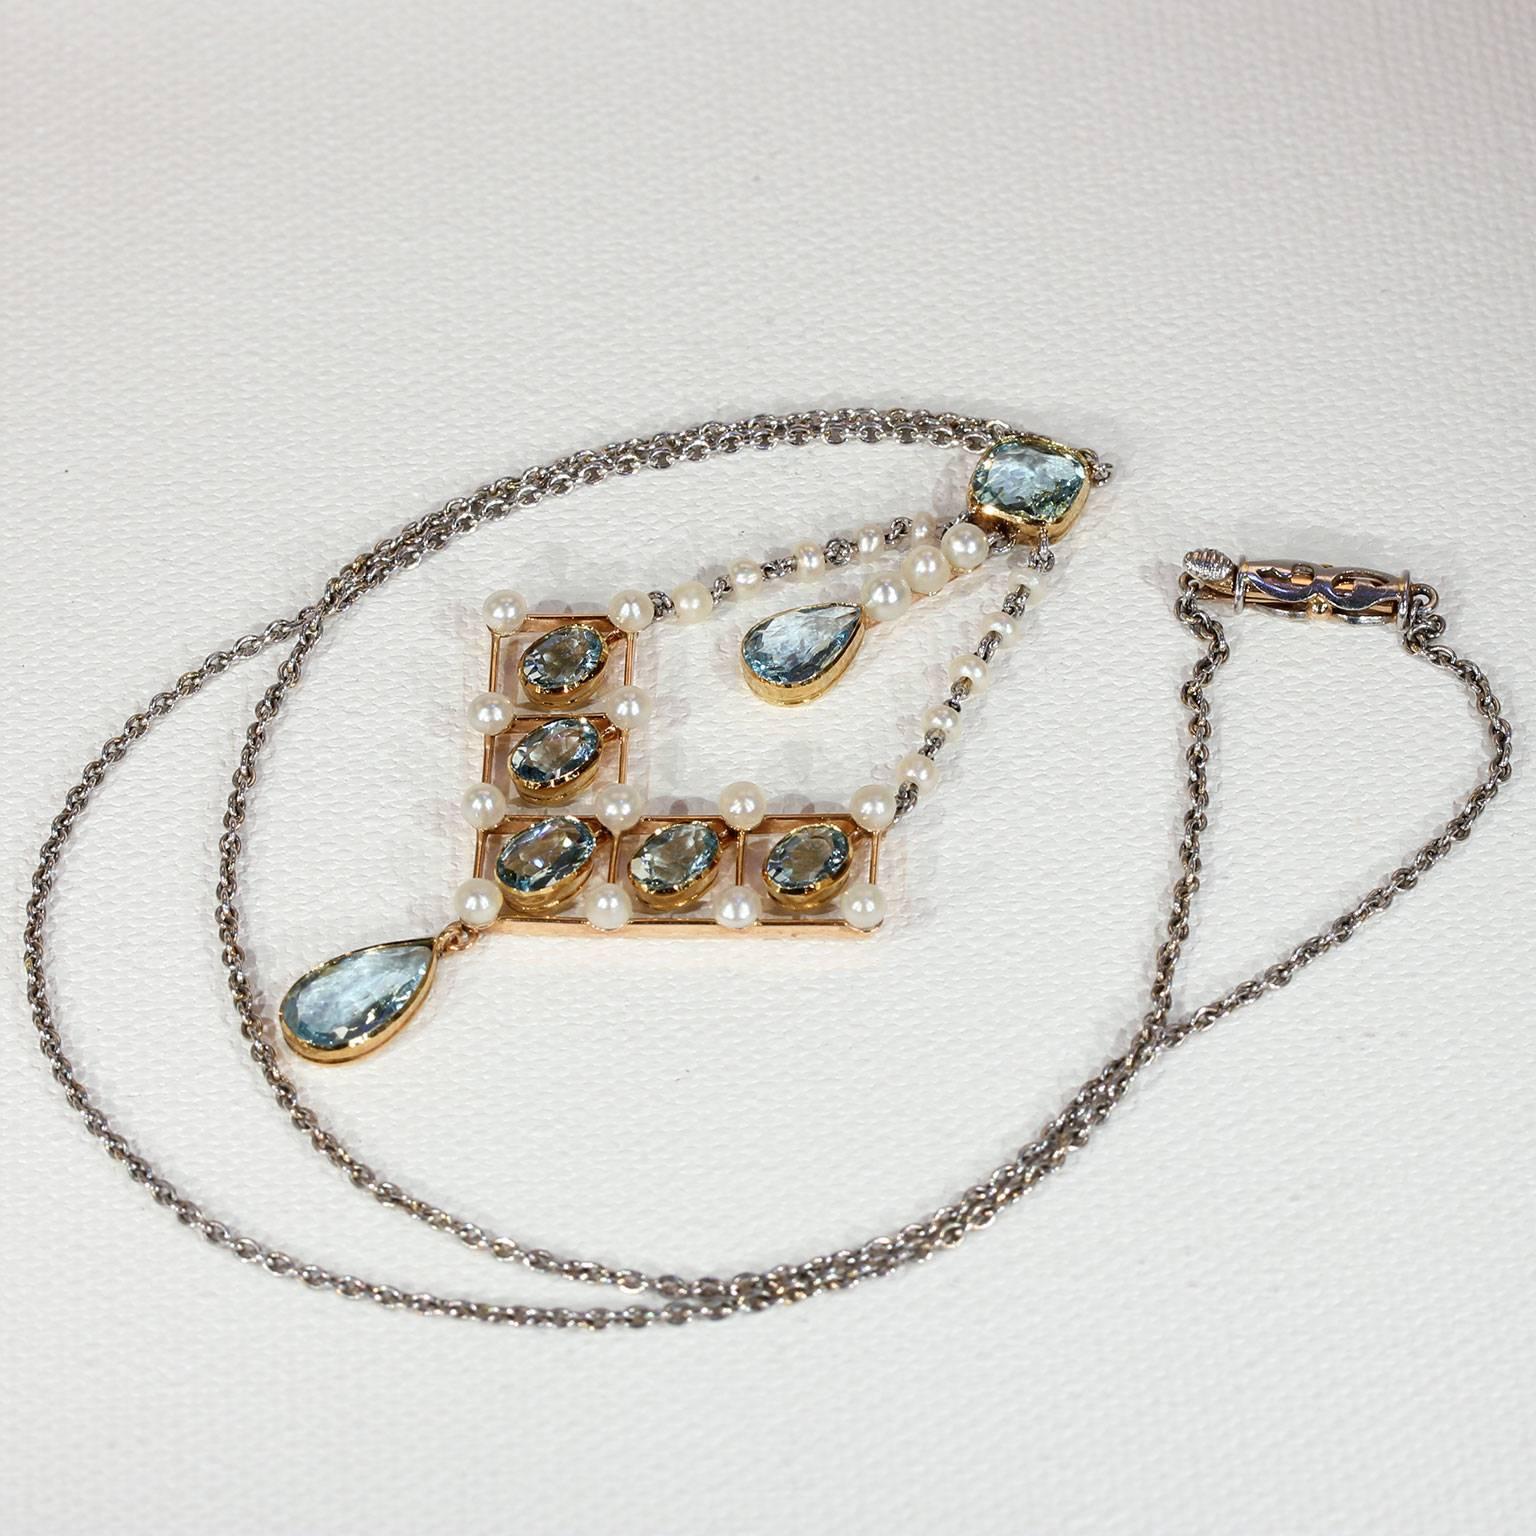 This elegant antique Edwardian aquamarine and pearl necklace was handcrafted by the well known firm of ’Asprey’, in London around 1910. It’s a breathtaking piece with eight aquamarines, one square cut, two pear cuts, and five oval shaped stones,